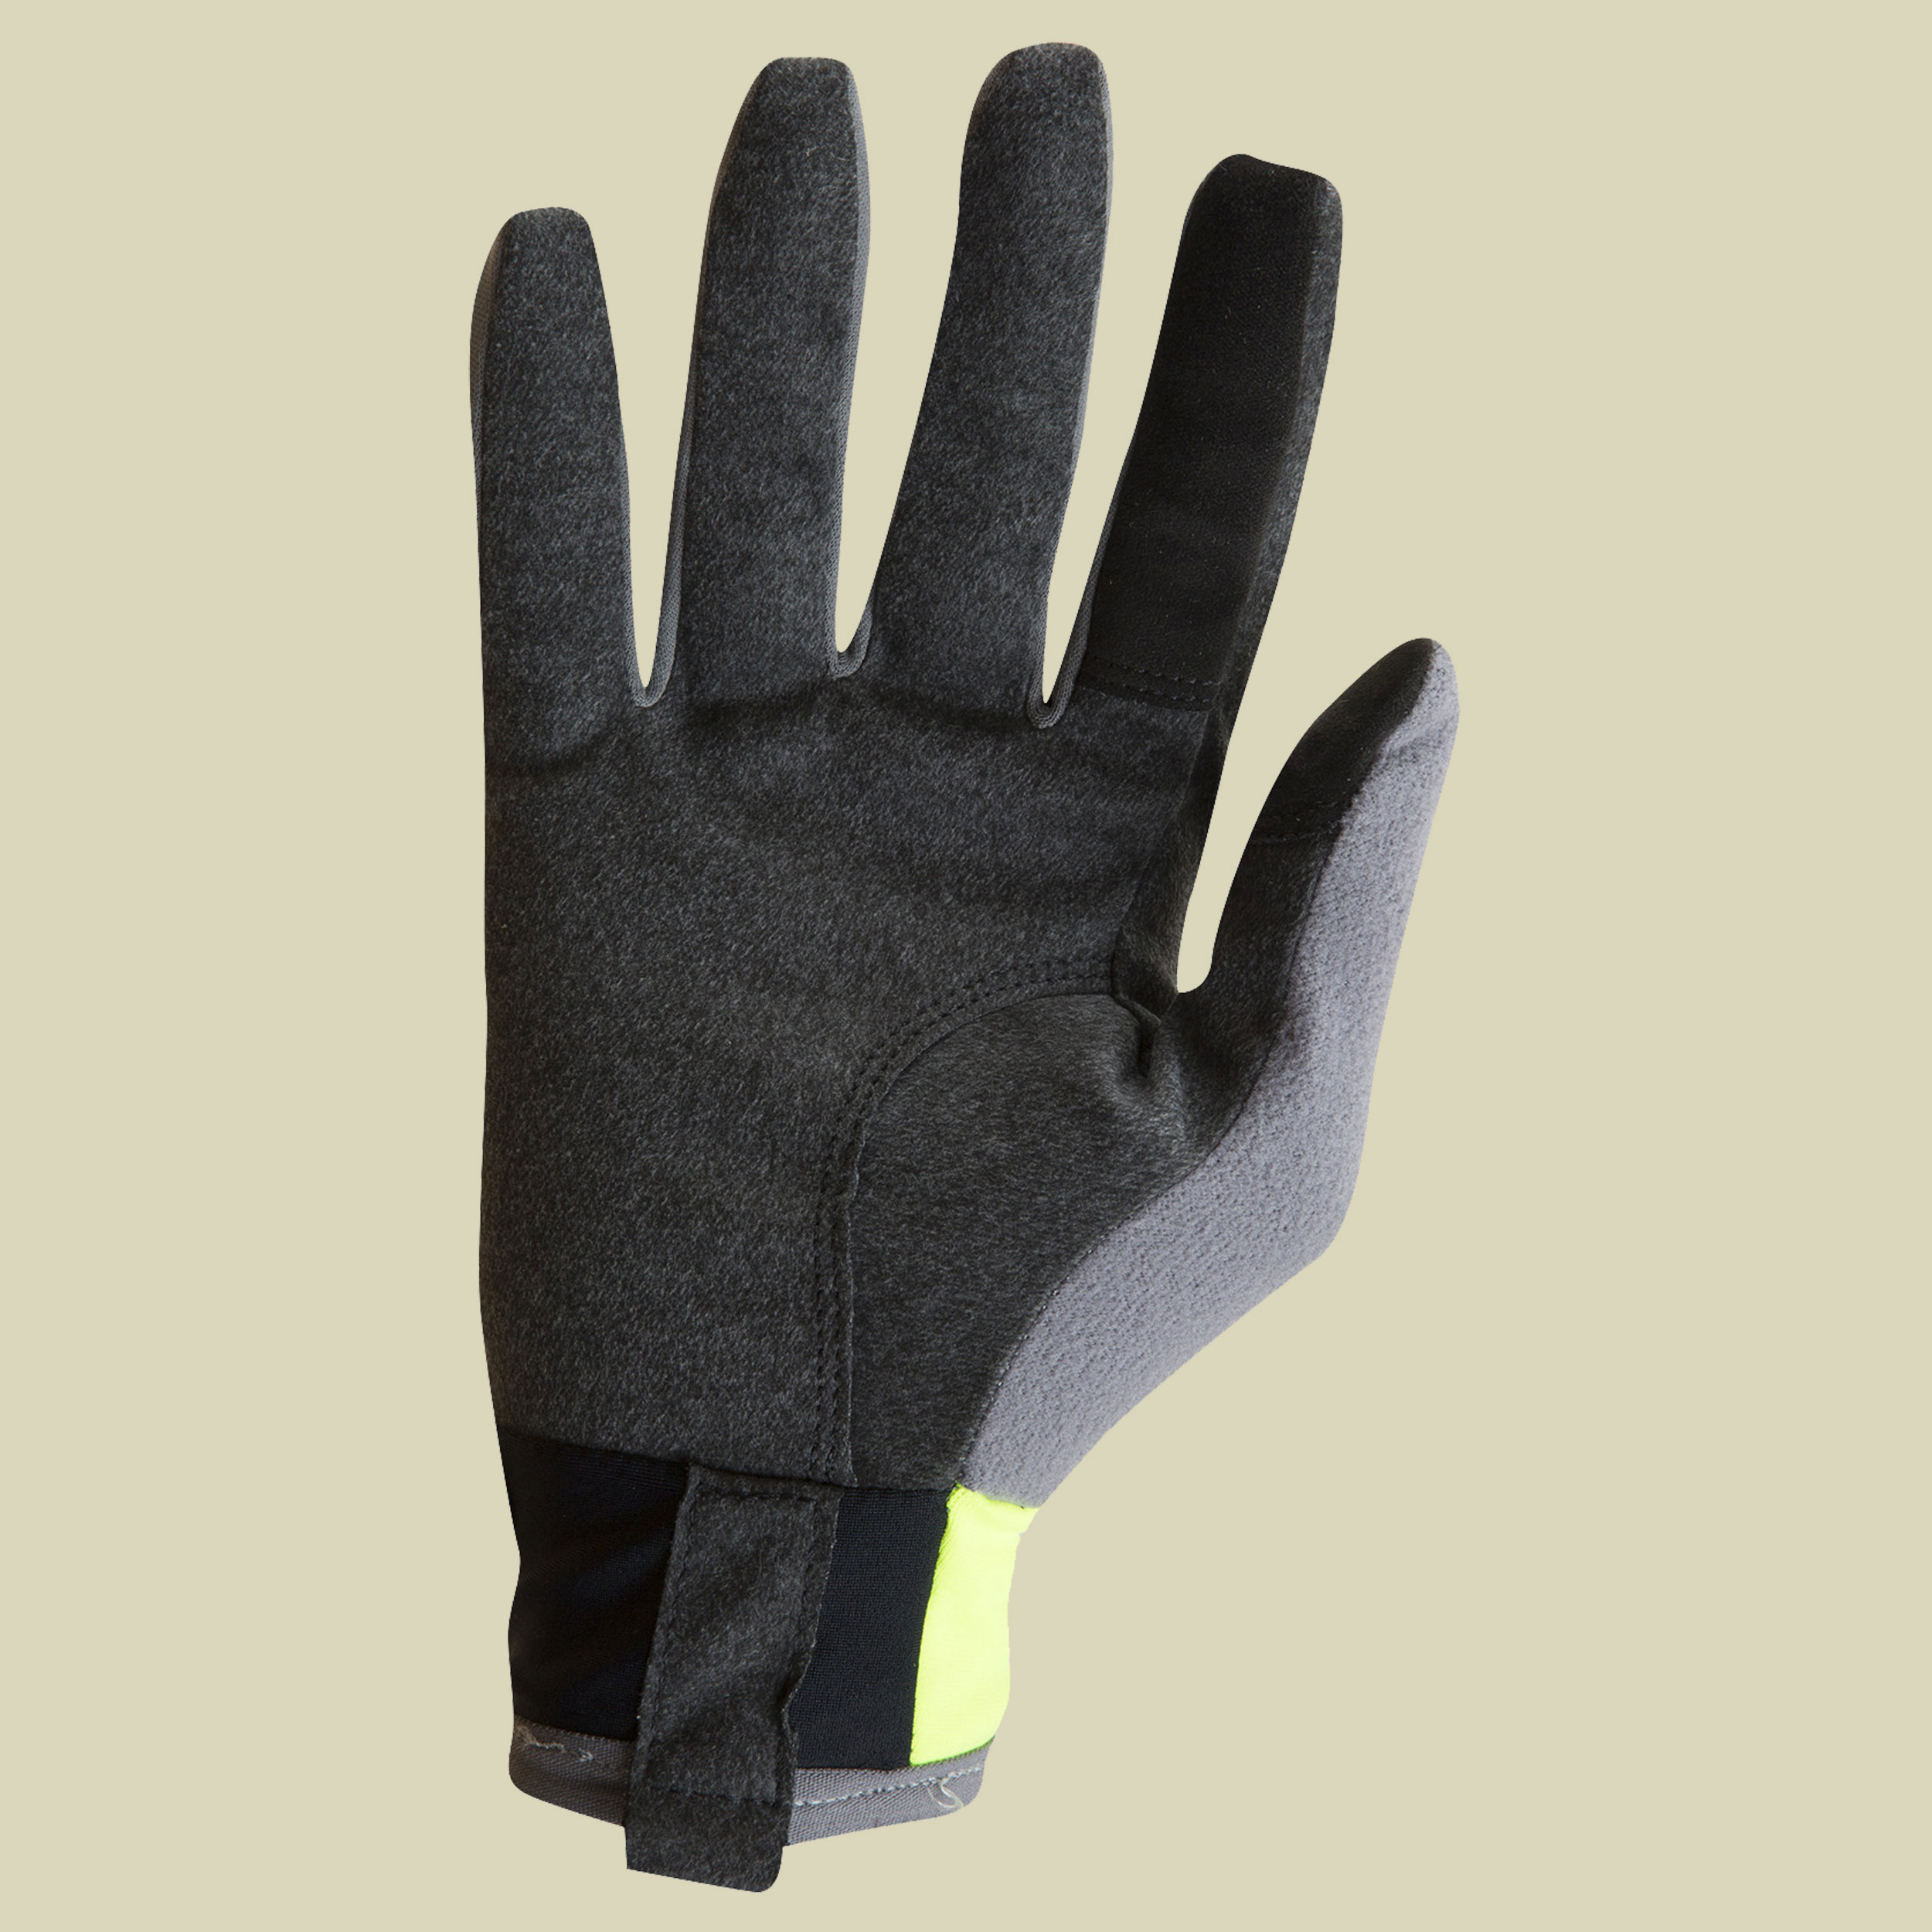 Escape Thermal Glove Größe S Farbe screaming yellow